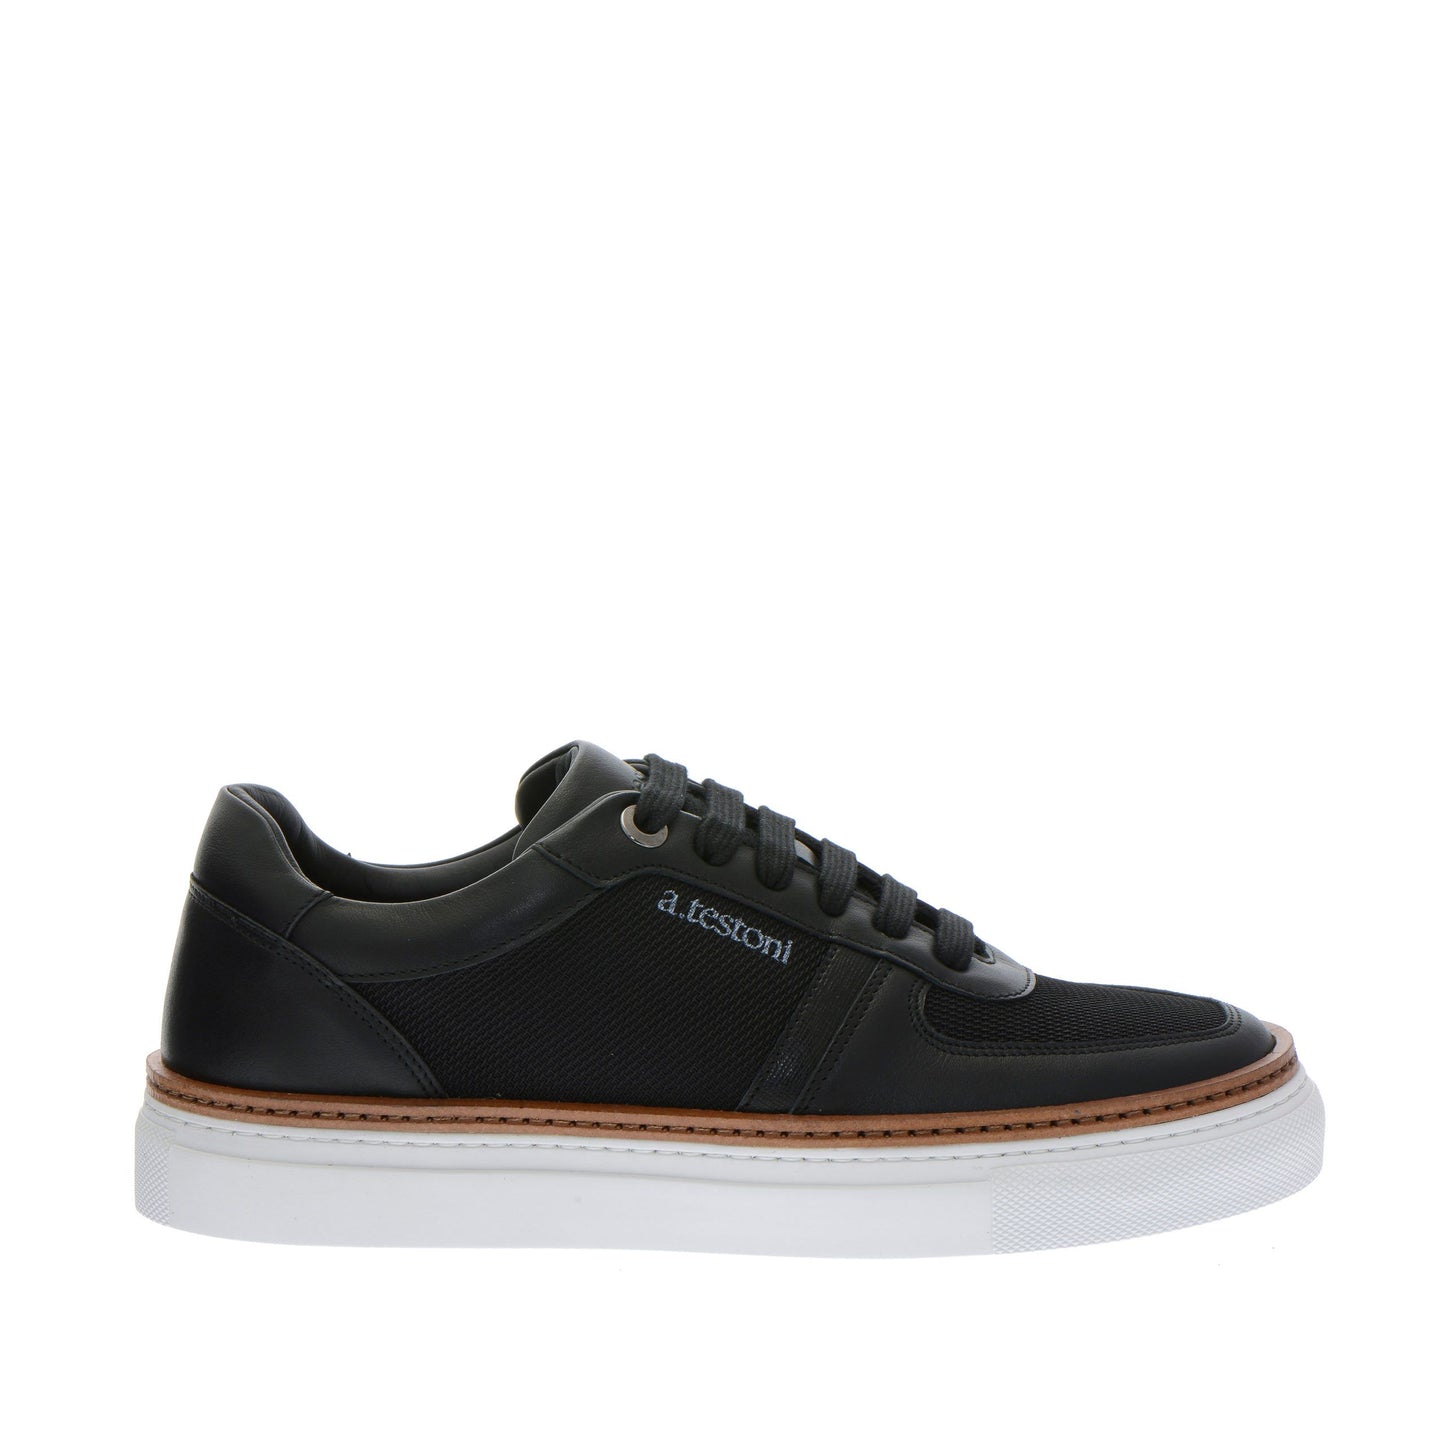 Chic Calf Leather Sneakers with Saffiano Accents